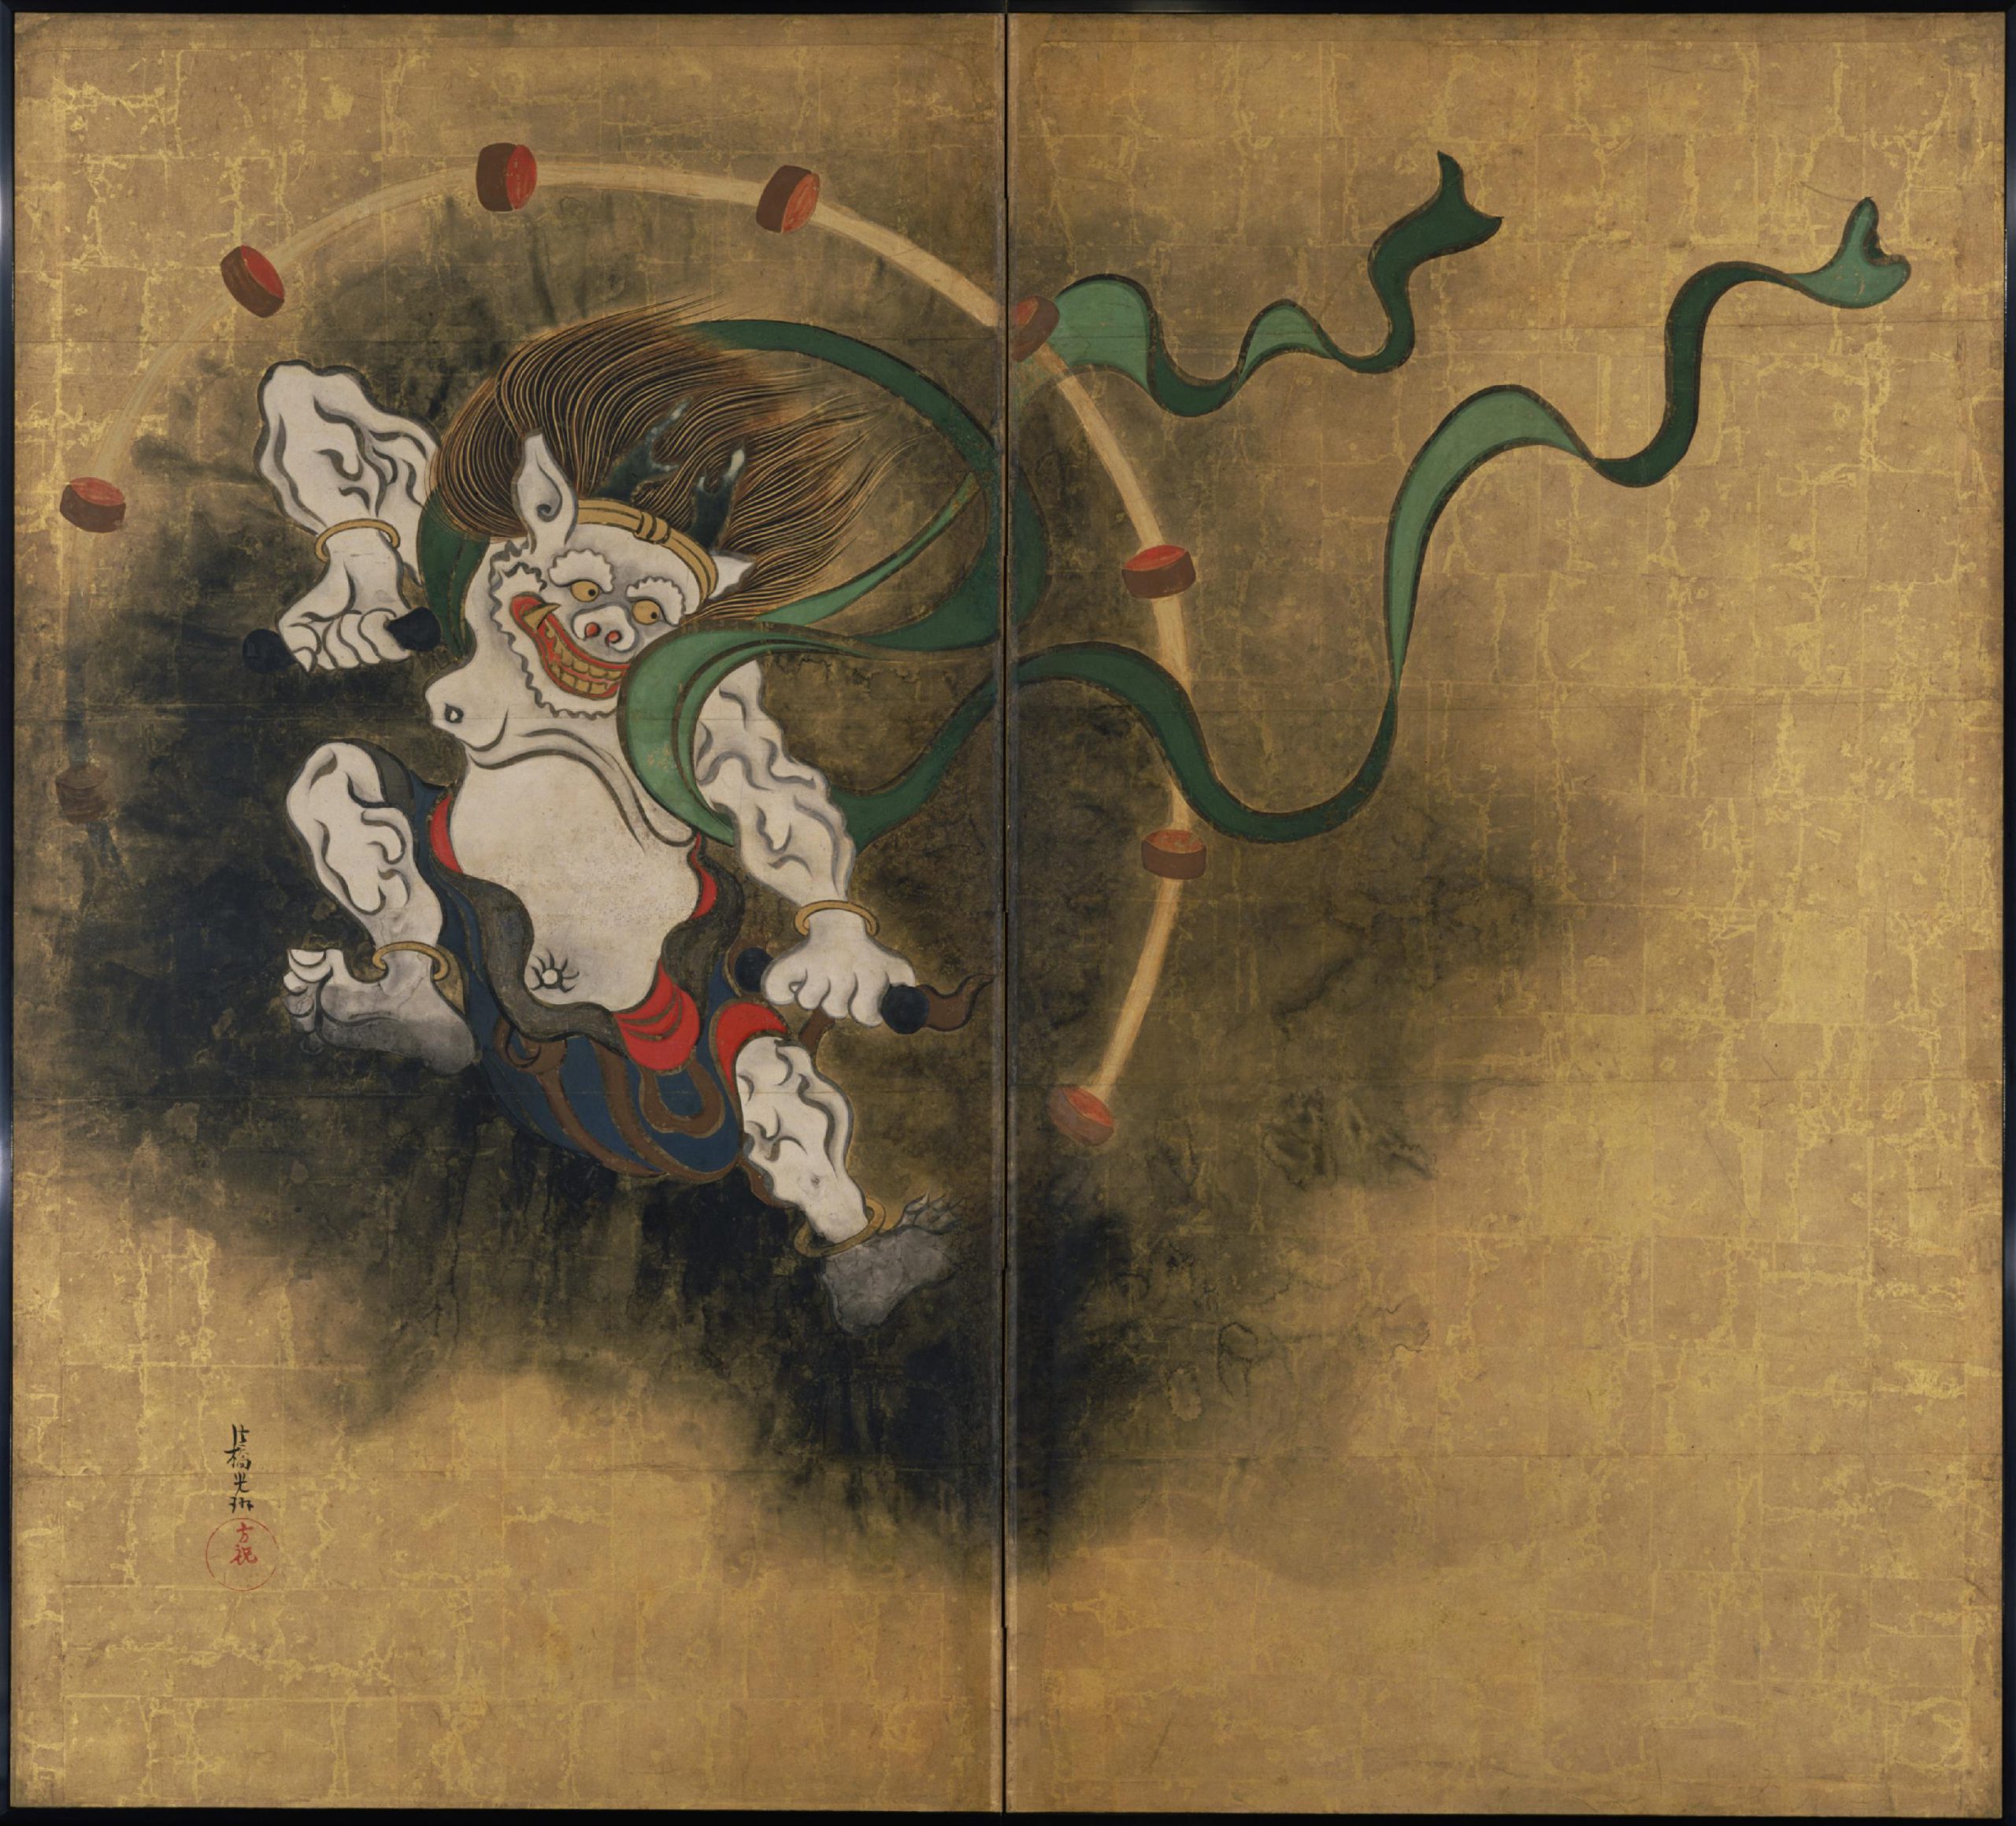 A brief history of the arts of Japan: the Edo period (from 17th to 